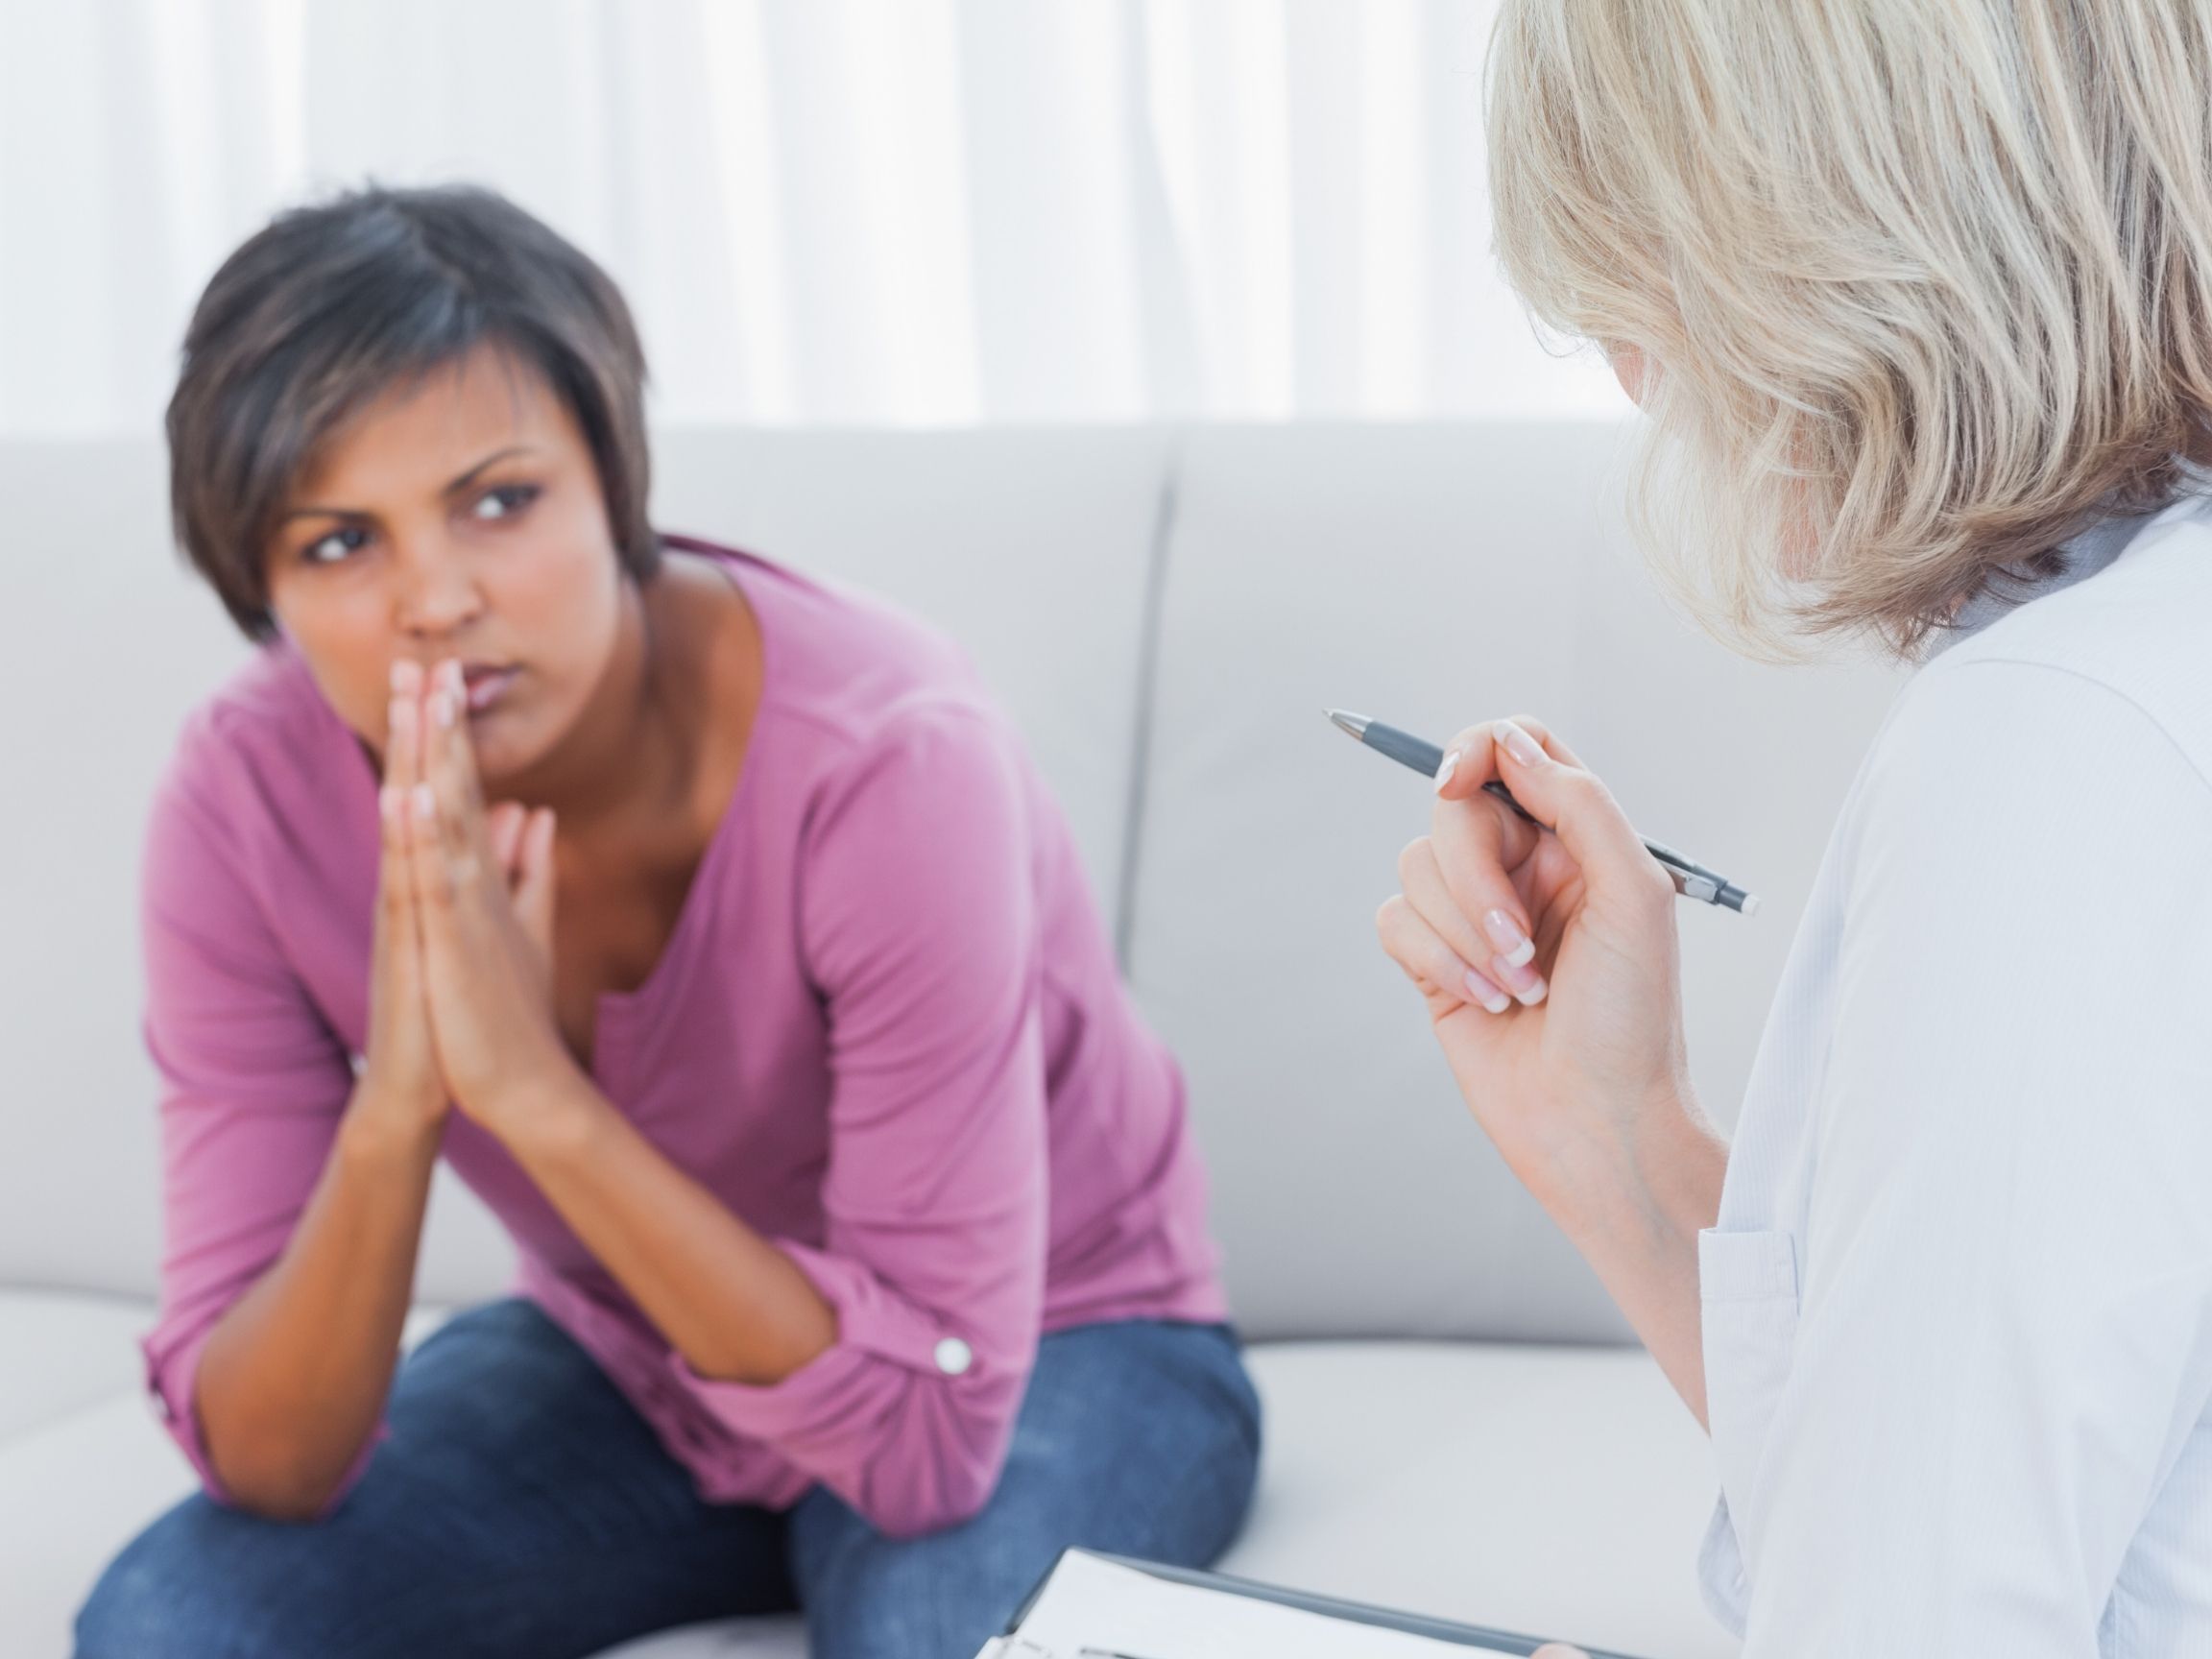 Getting a diagnosis of lupus is never fun, understanding what it means can help.